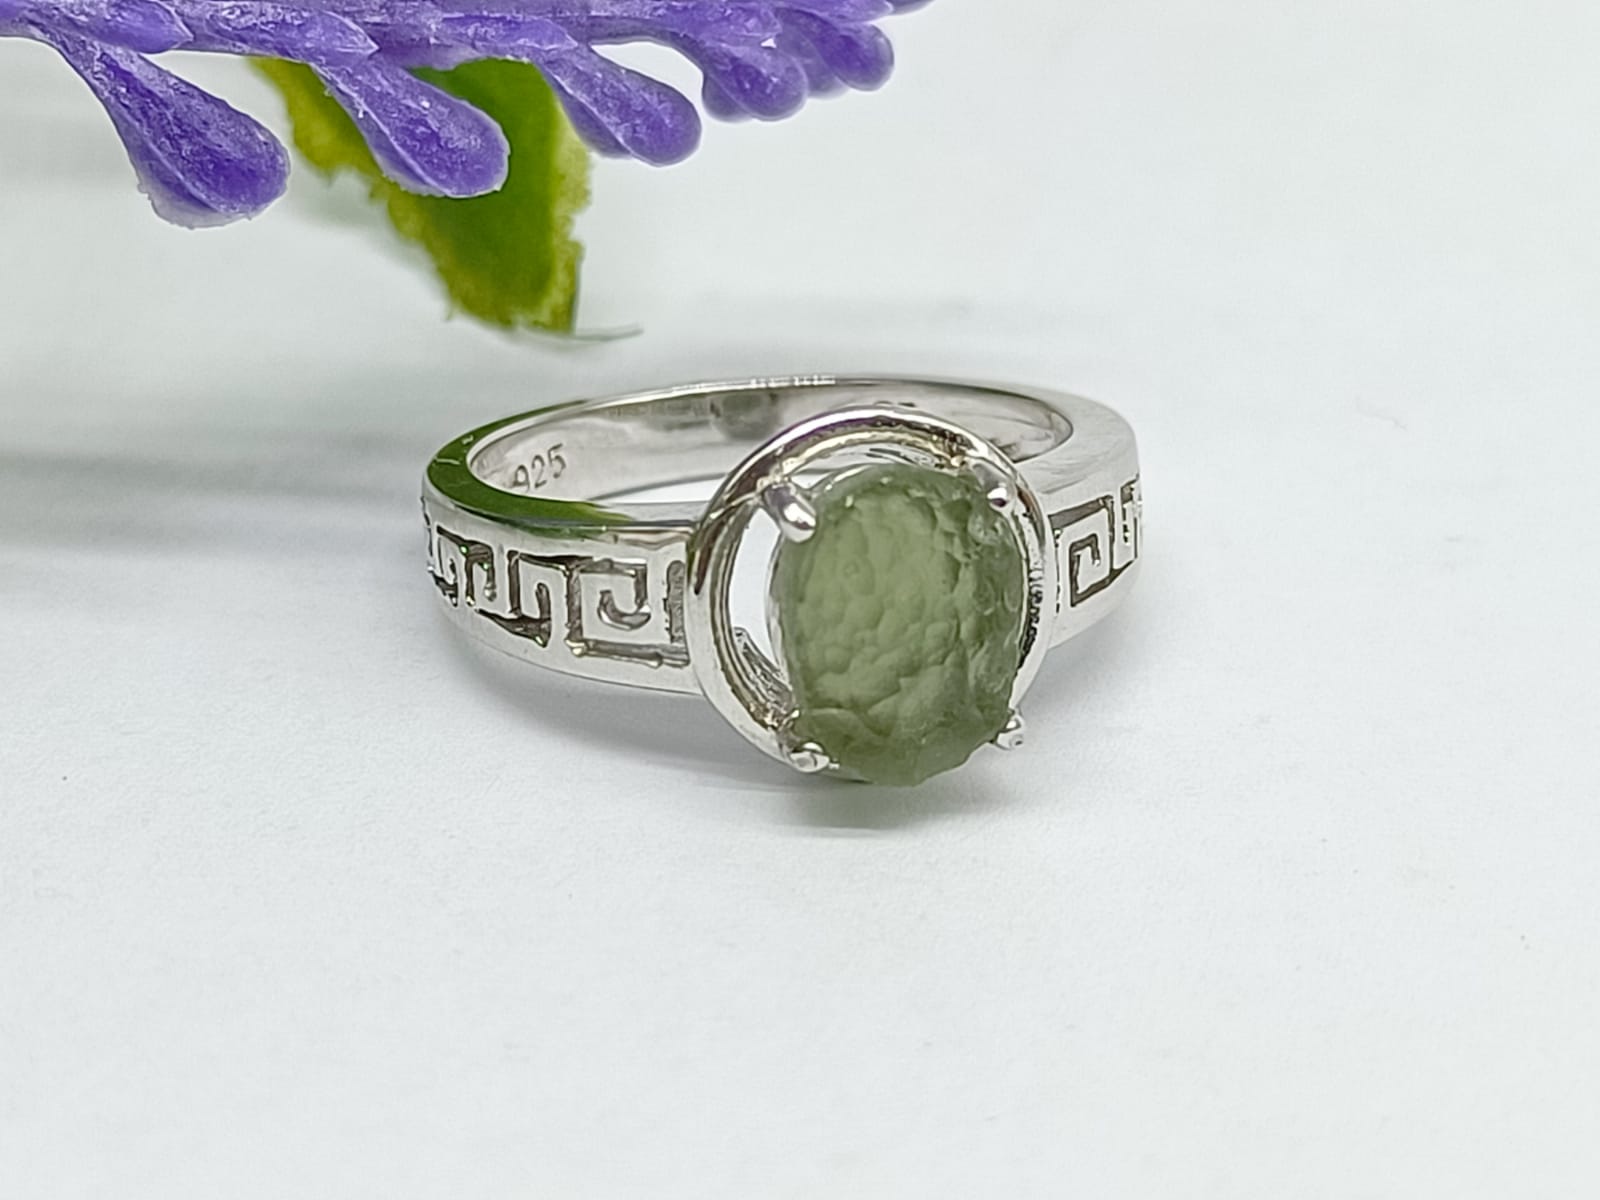 Authentic Moldavite 925 Silver Ring Size 7 USA or N1/2 AUS Crystal Wellness